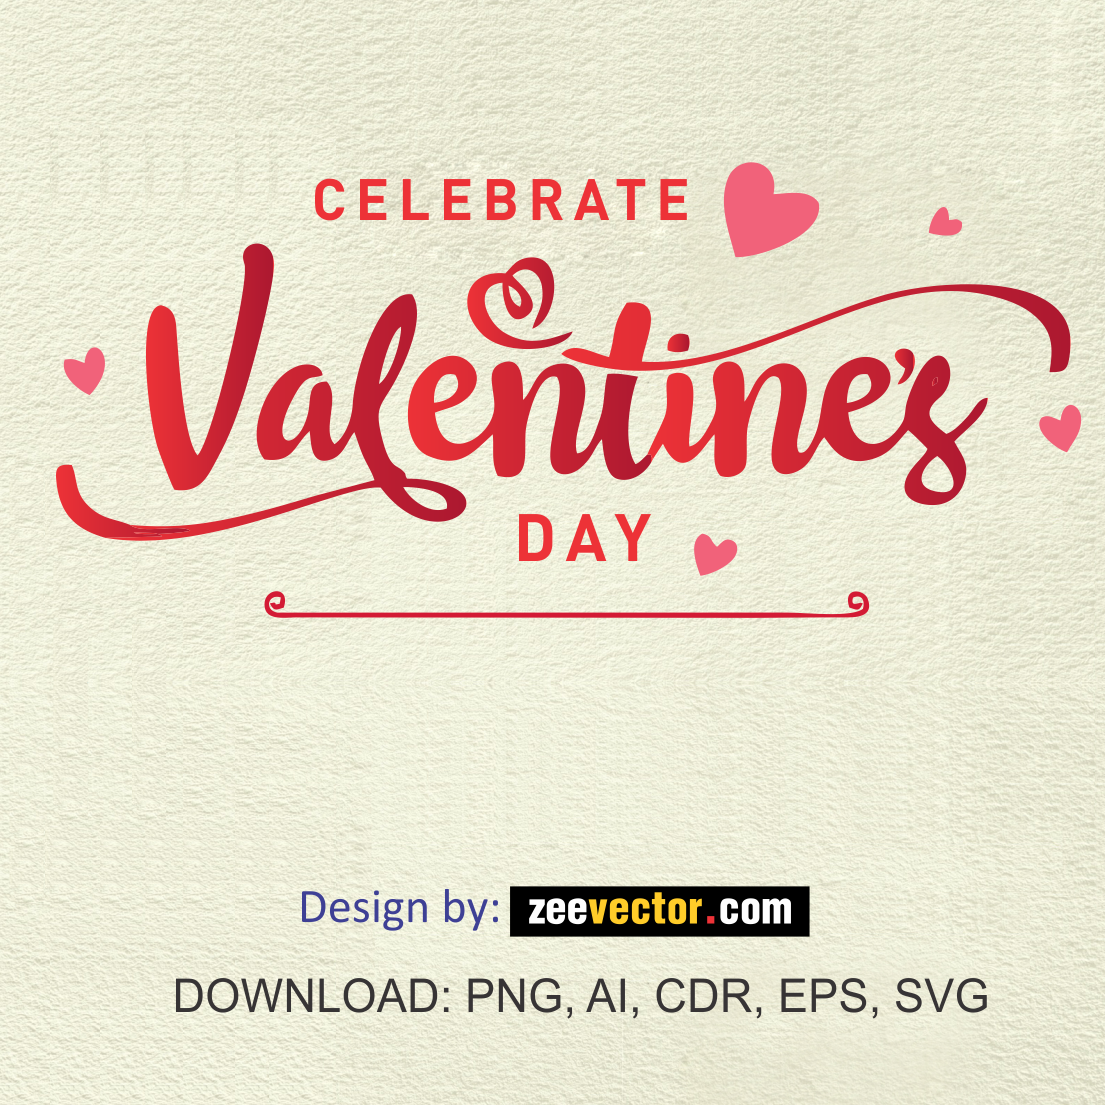 Valentines-Day-Vector-Free